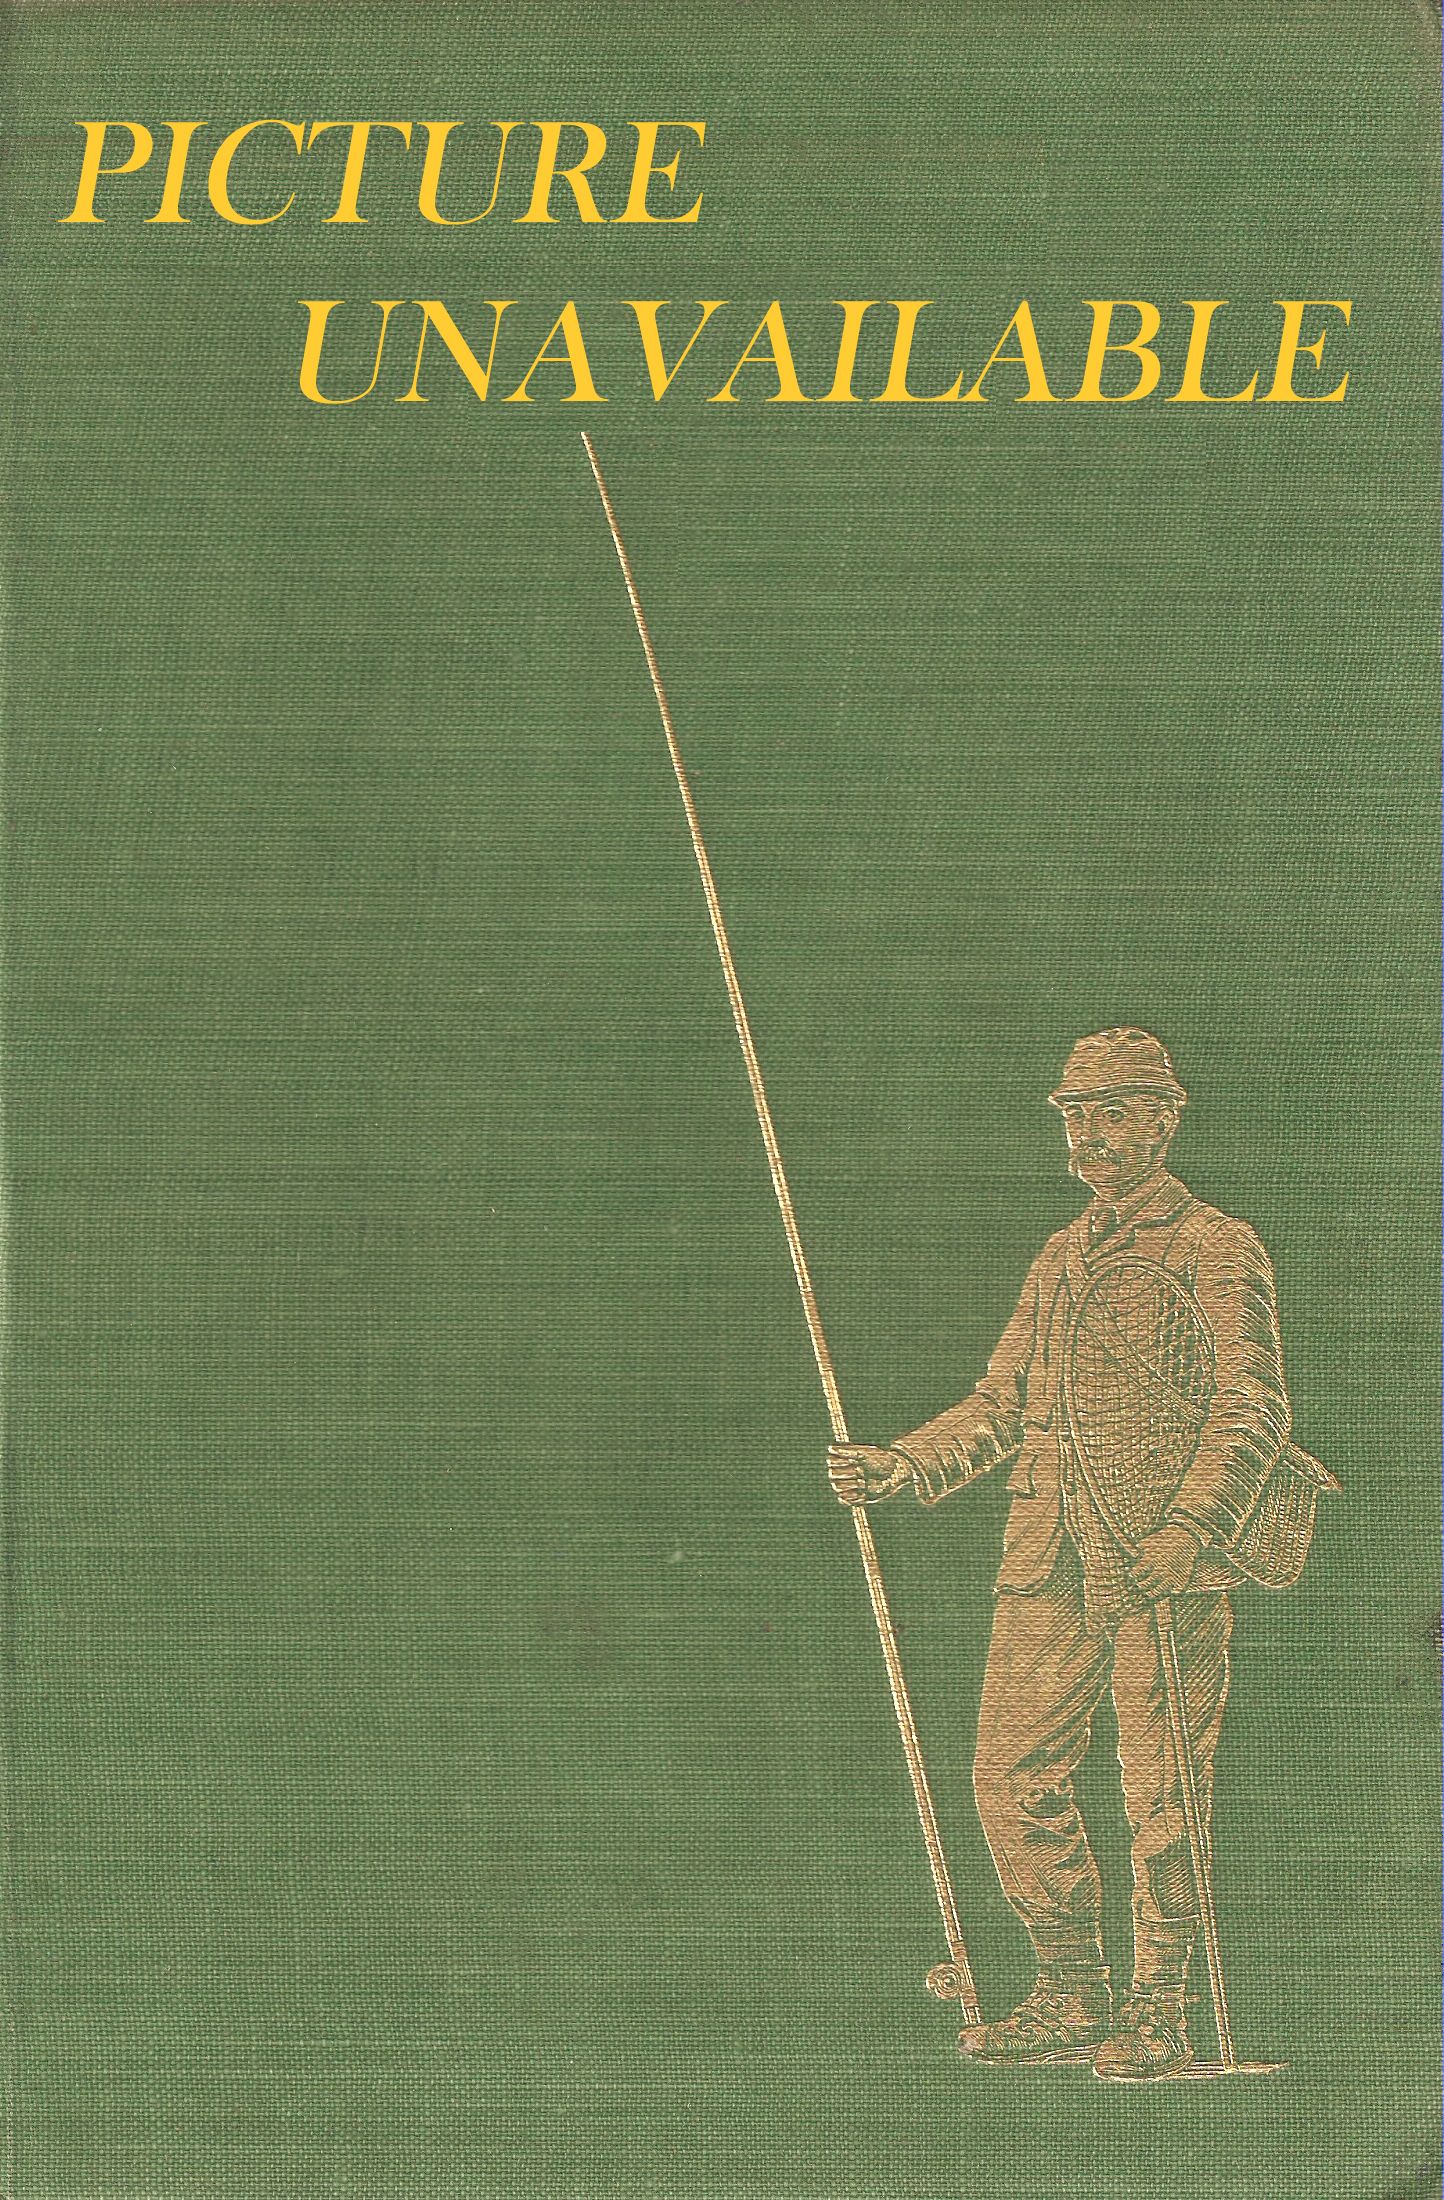 HARRY DRUIDALE: FISHERMAN FROM MANXLAND TO ENGLAND. By Henry Cadman, late  president of the Yorkshire Anglers' Association.